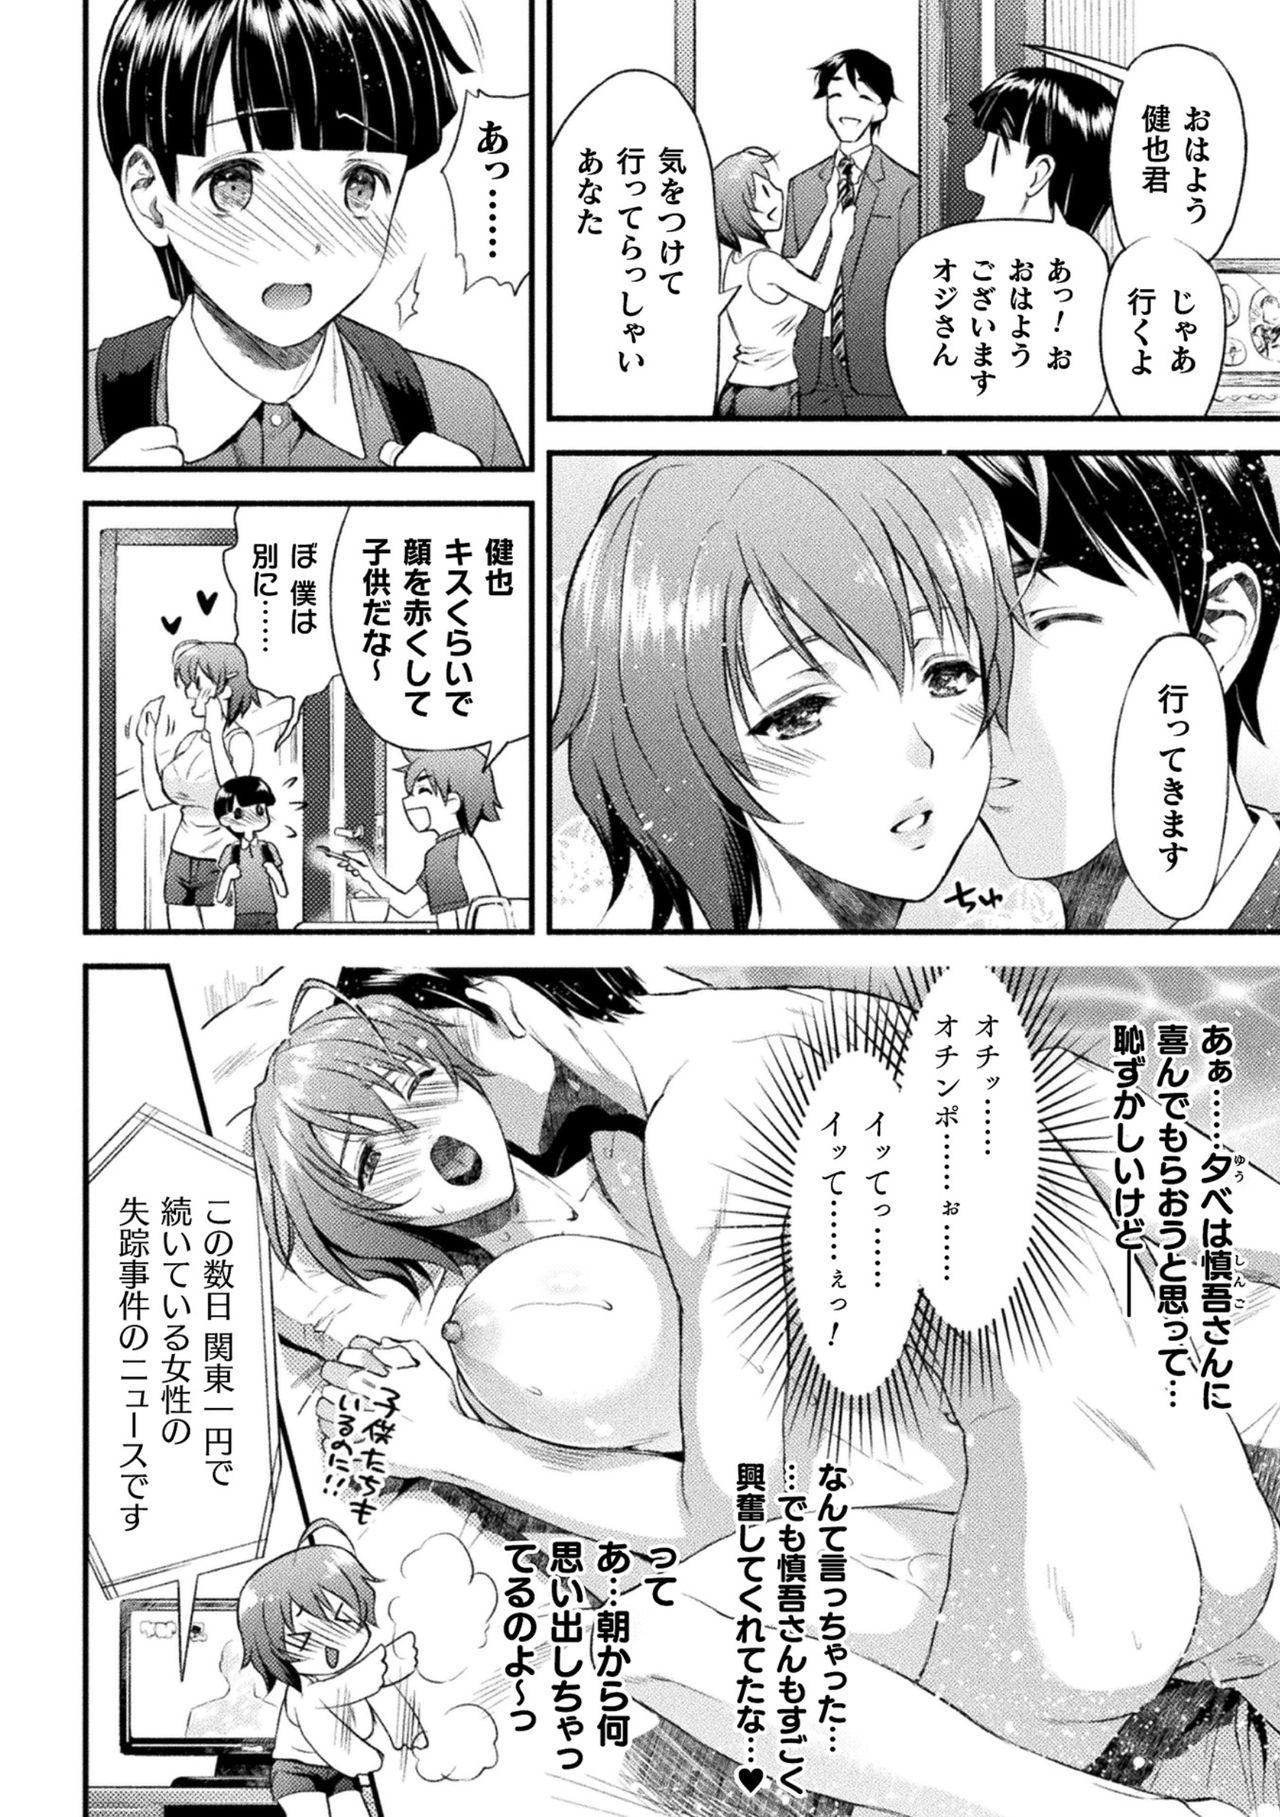 Audition Mama Wa Taimanin THE COMIC Ch. 1-9 Tanned - Page 7